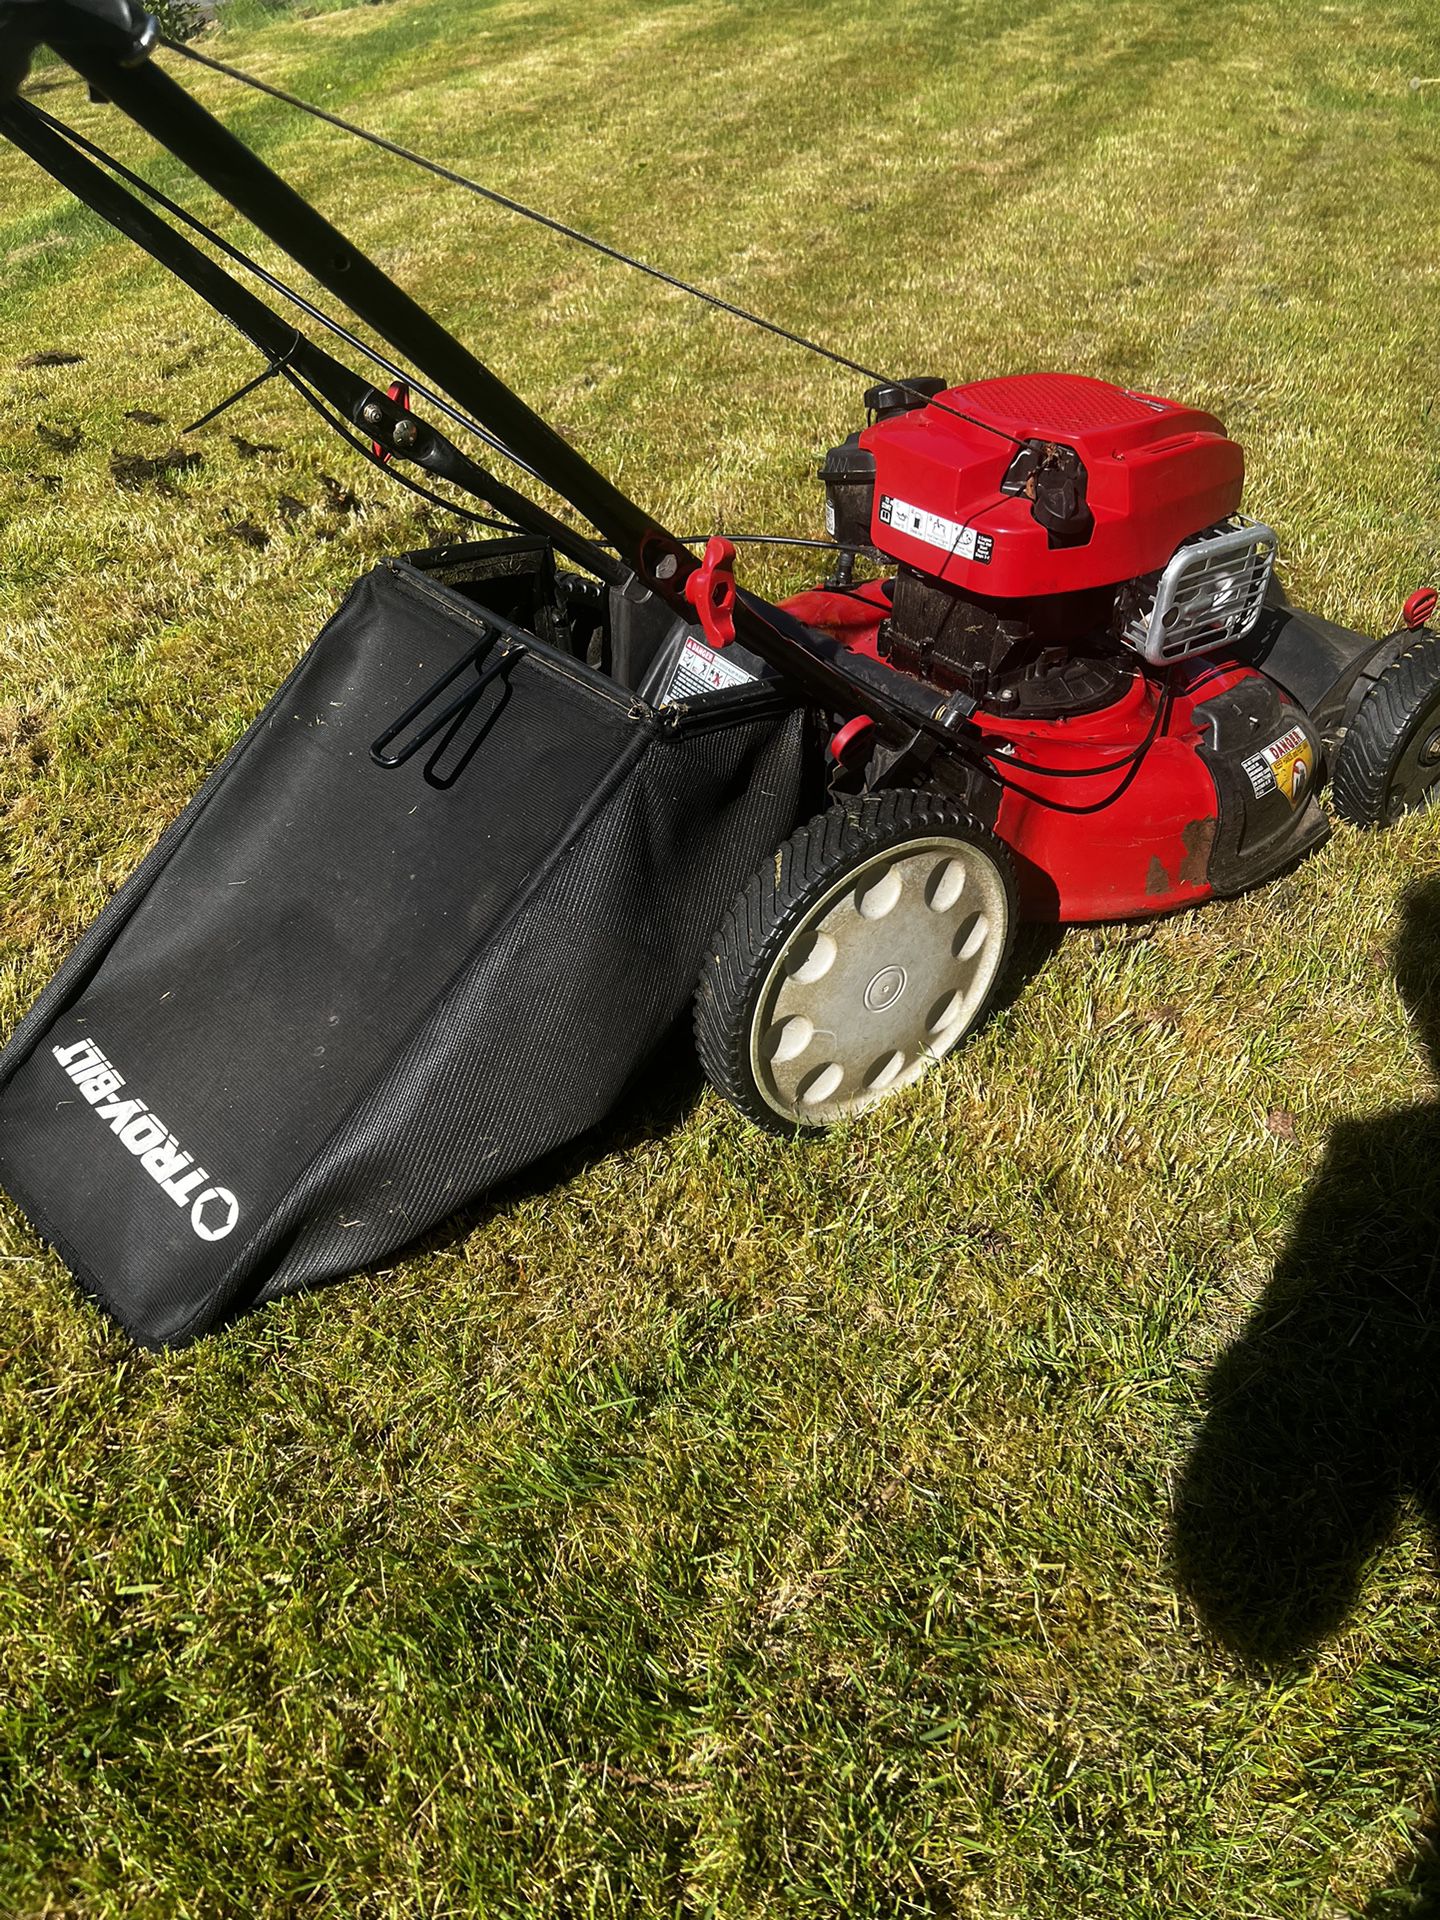 Troy Bilt Self Propelled Lawn mower.  About 5 Yrs Old. 